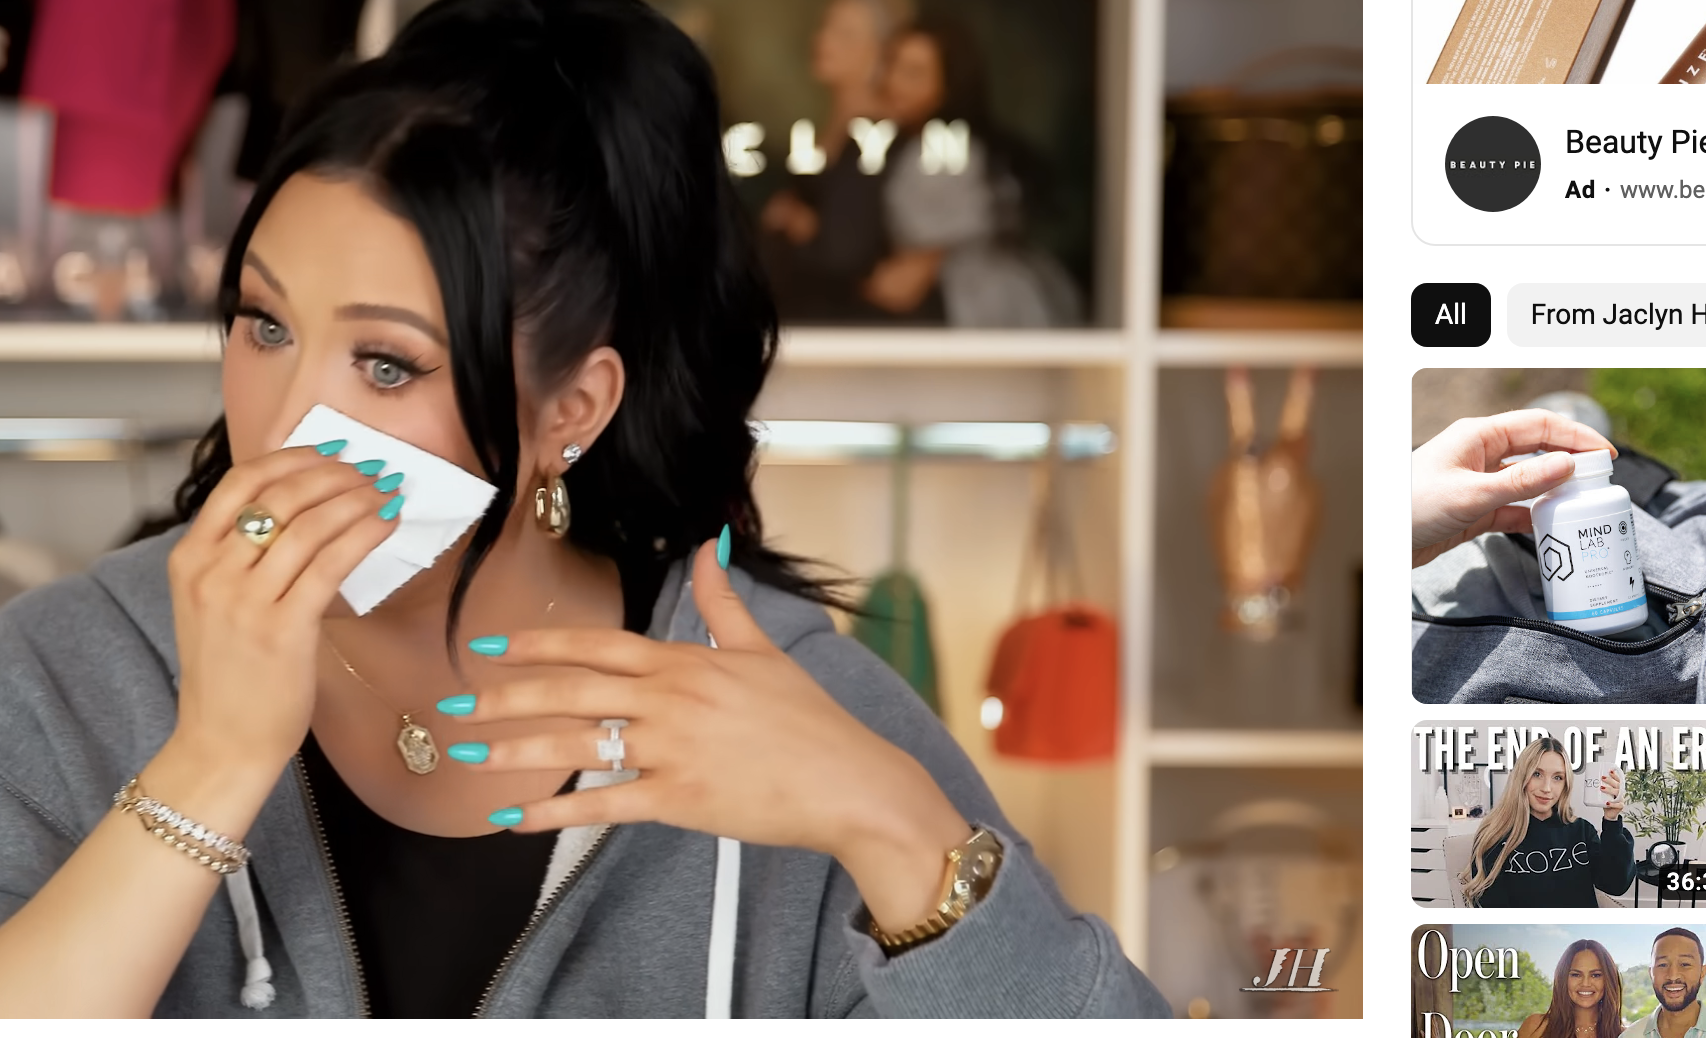 Beauty Influencer Jaclyn Hill Cosmetics Defective Lipsticks Have